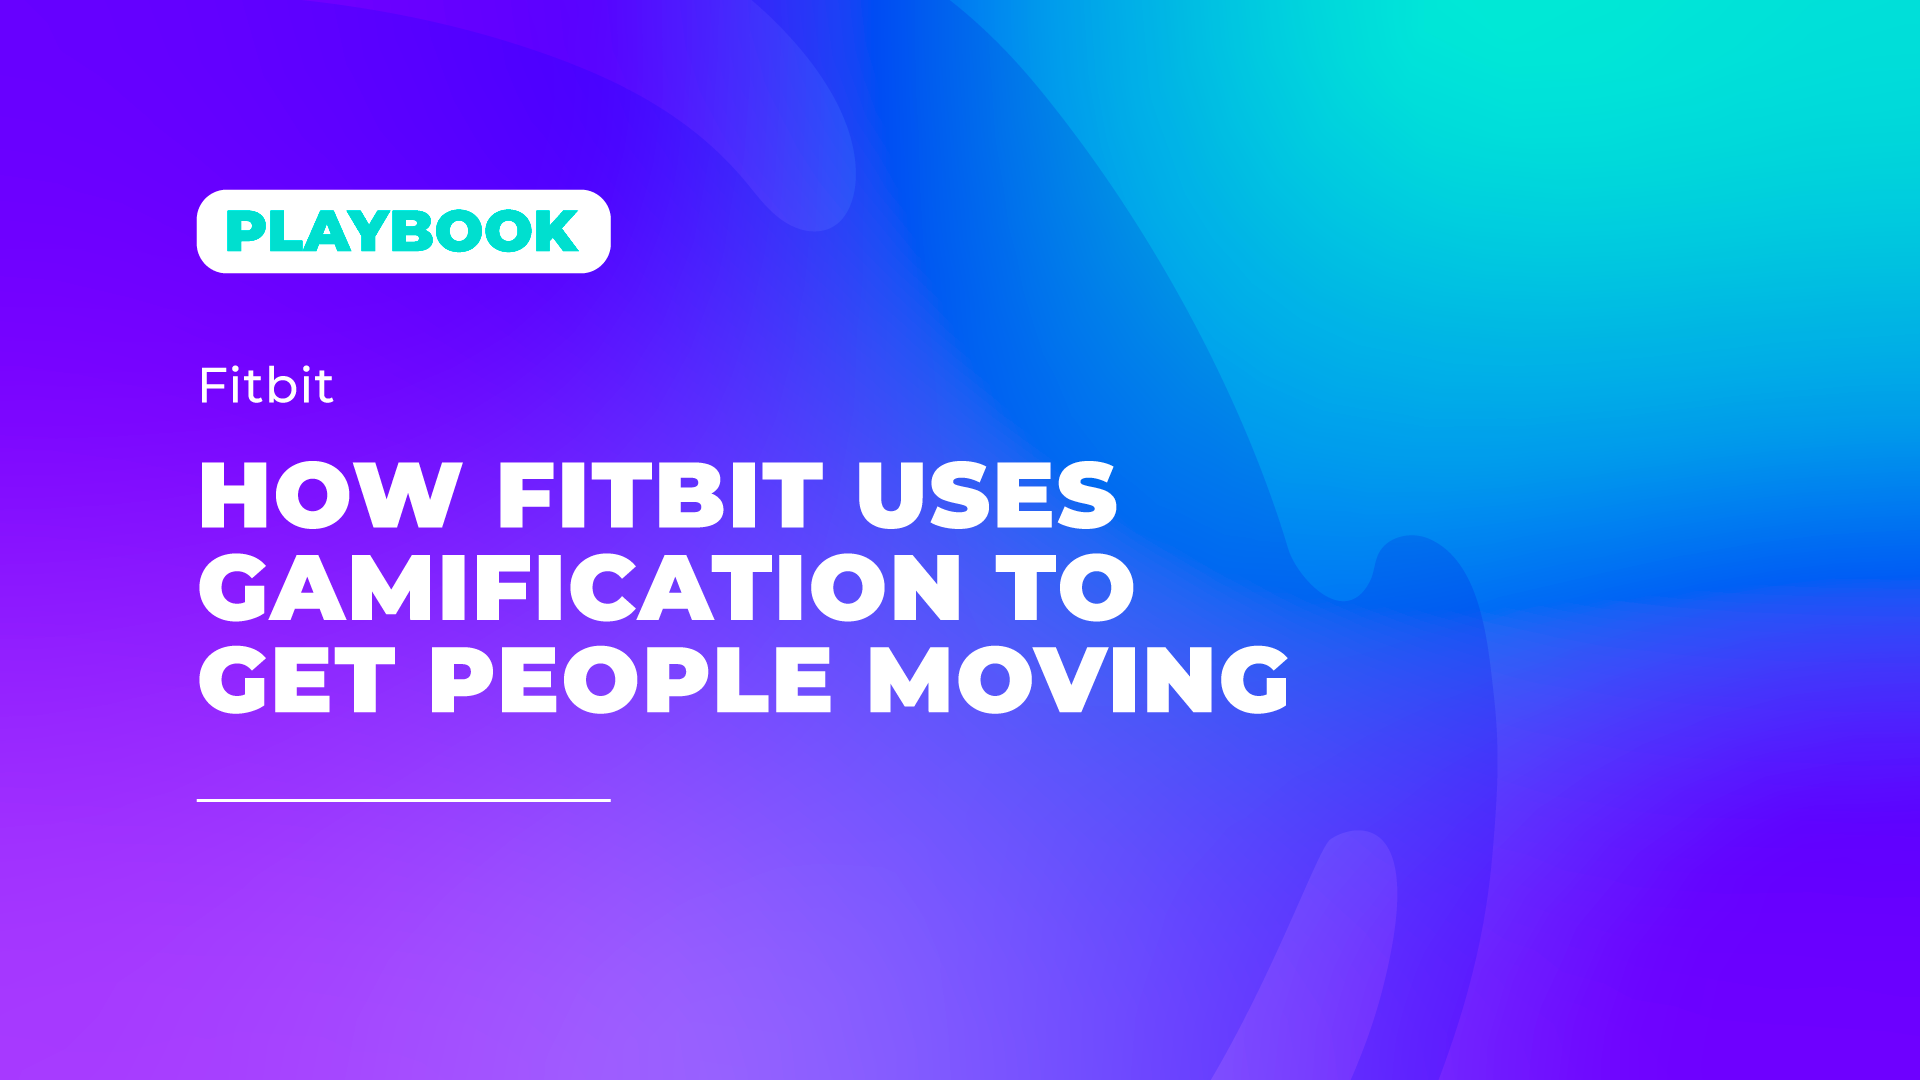 Fitbit Gamification Playbook